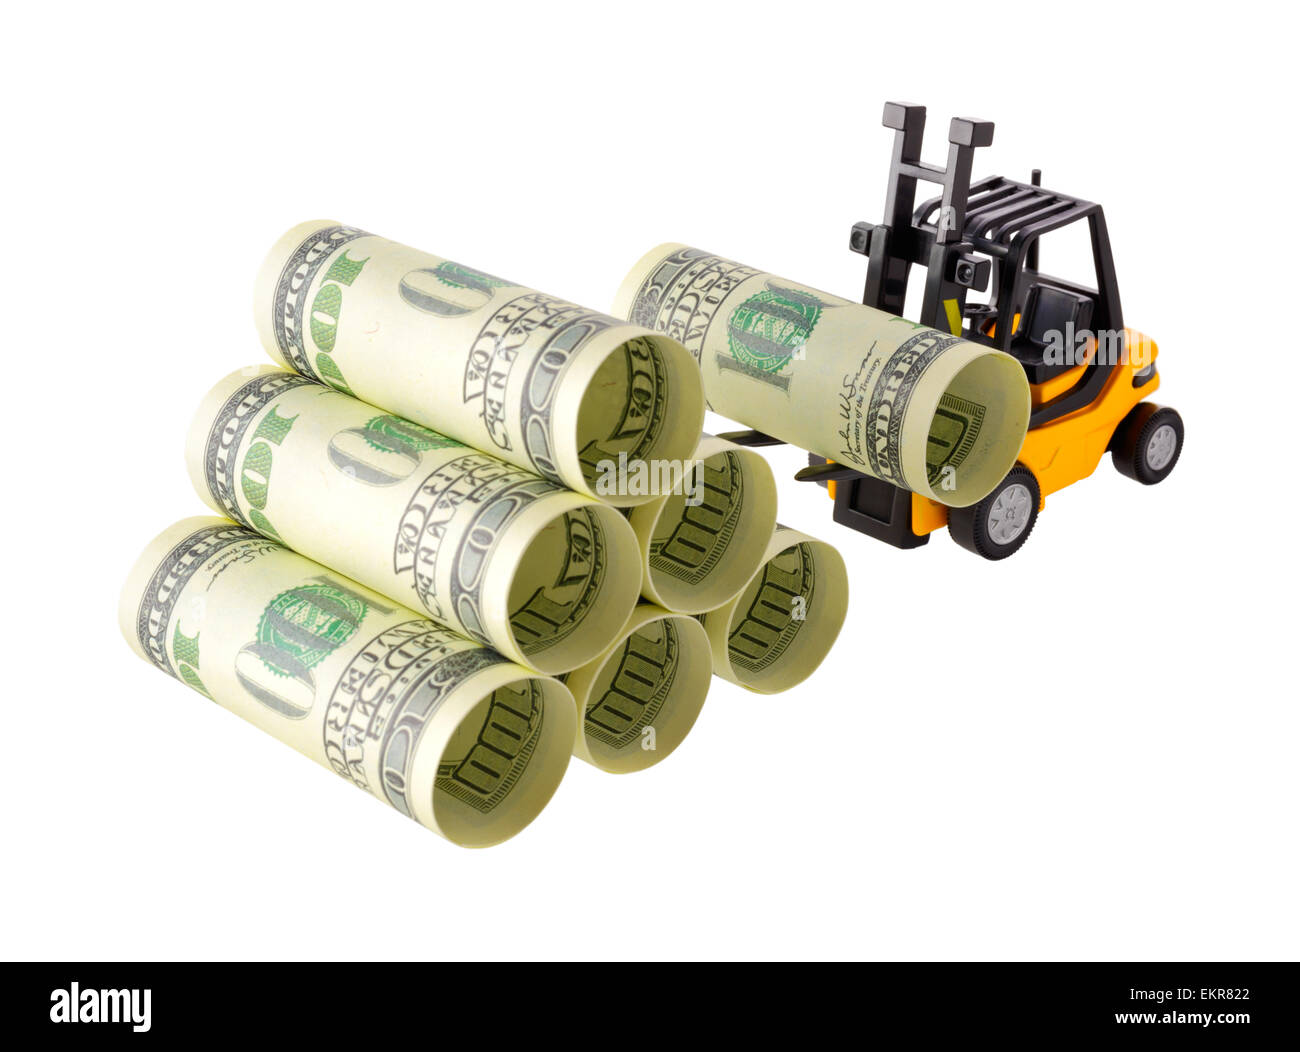 Isolated Objects Financial Concept Yellow Forklift Stacking Up Stock Photo Alamy